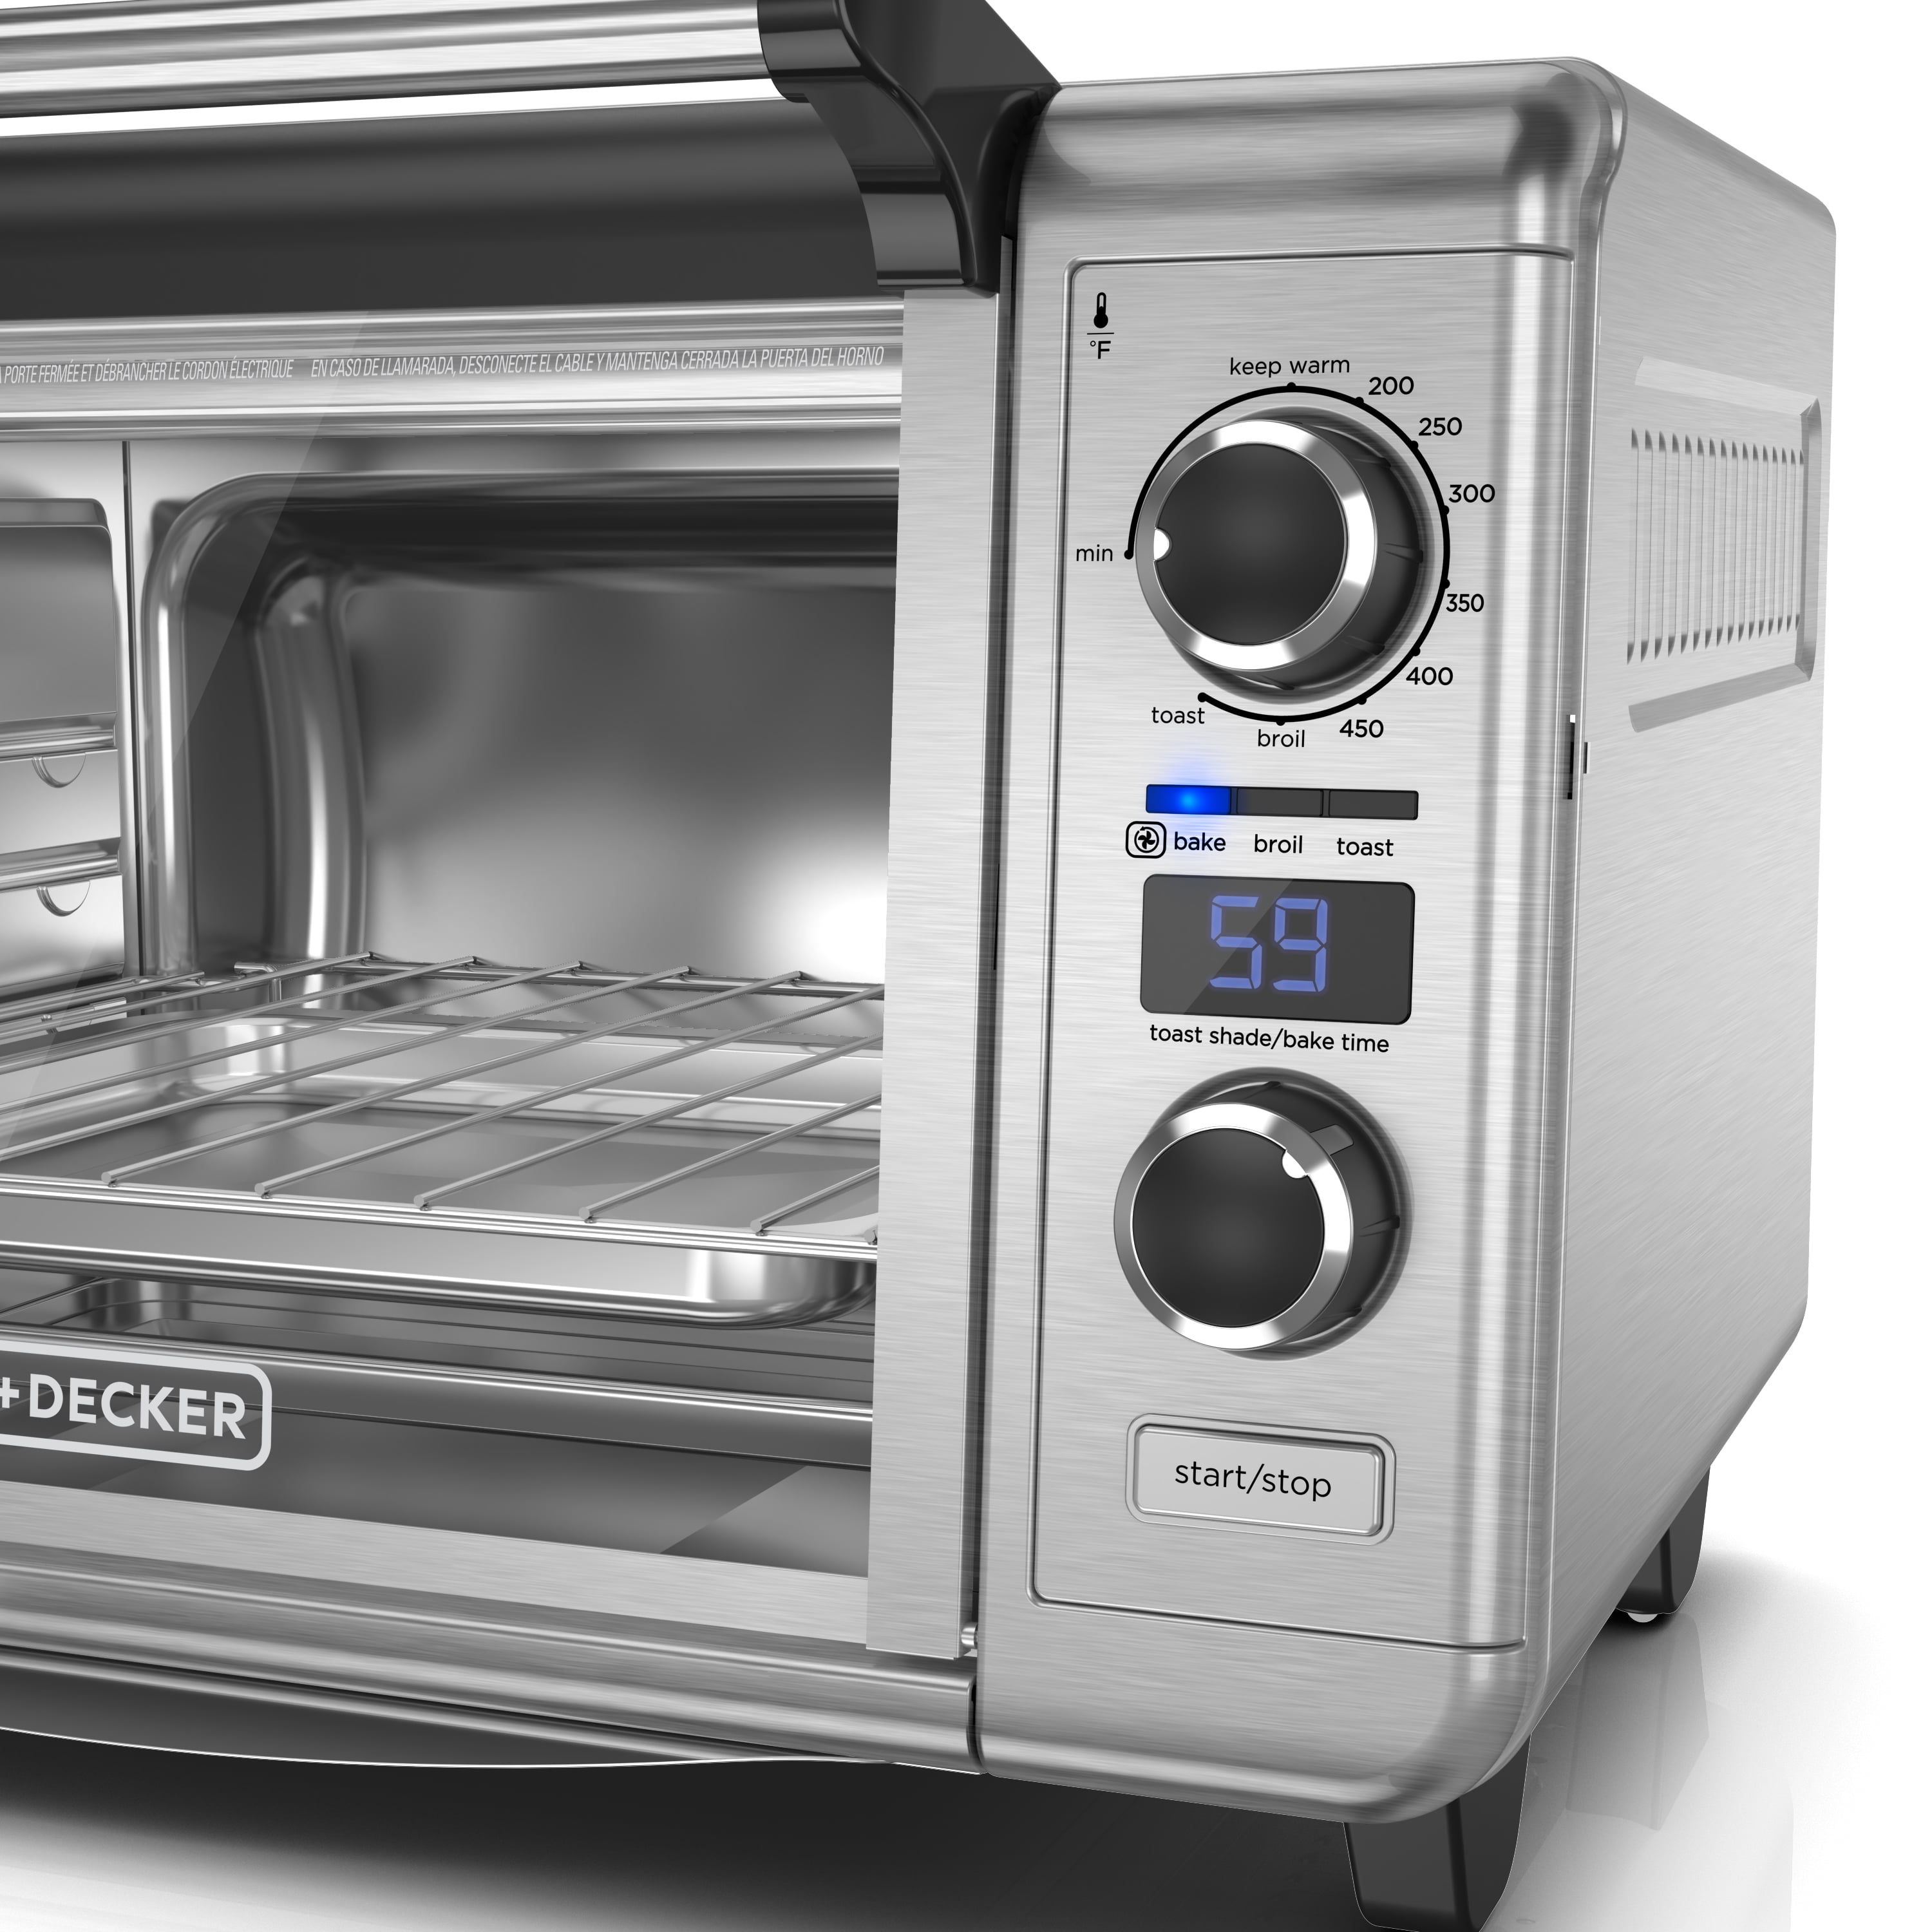 BLACK+DECKER 6-Slice Convection Countertop Toaster Oven, Stainless  Steel/Black 708702687870 